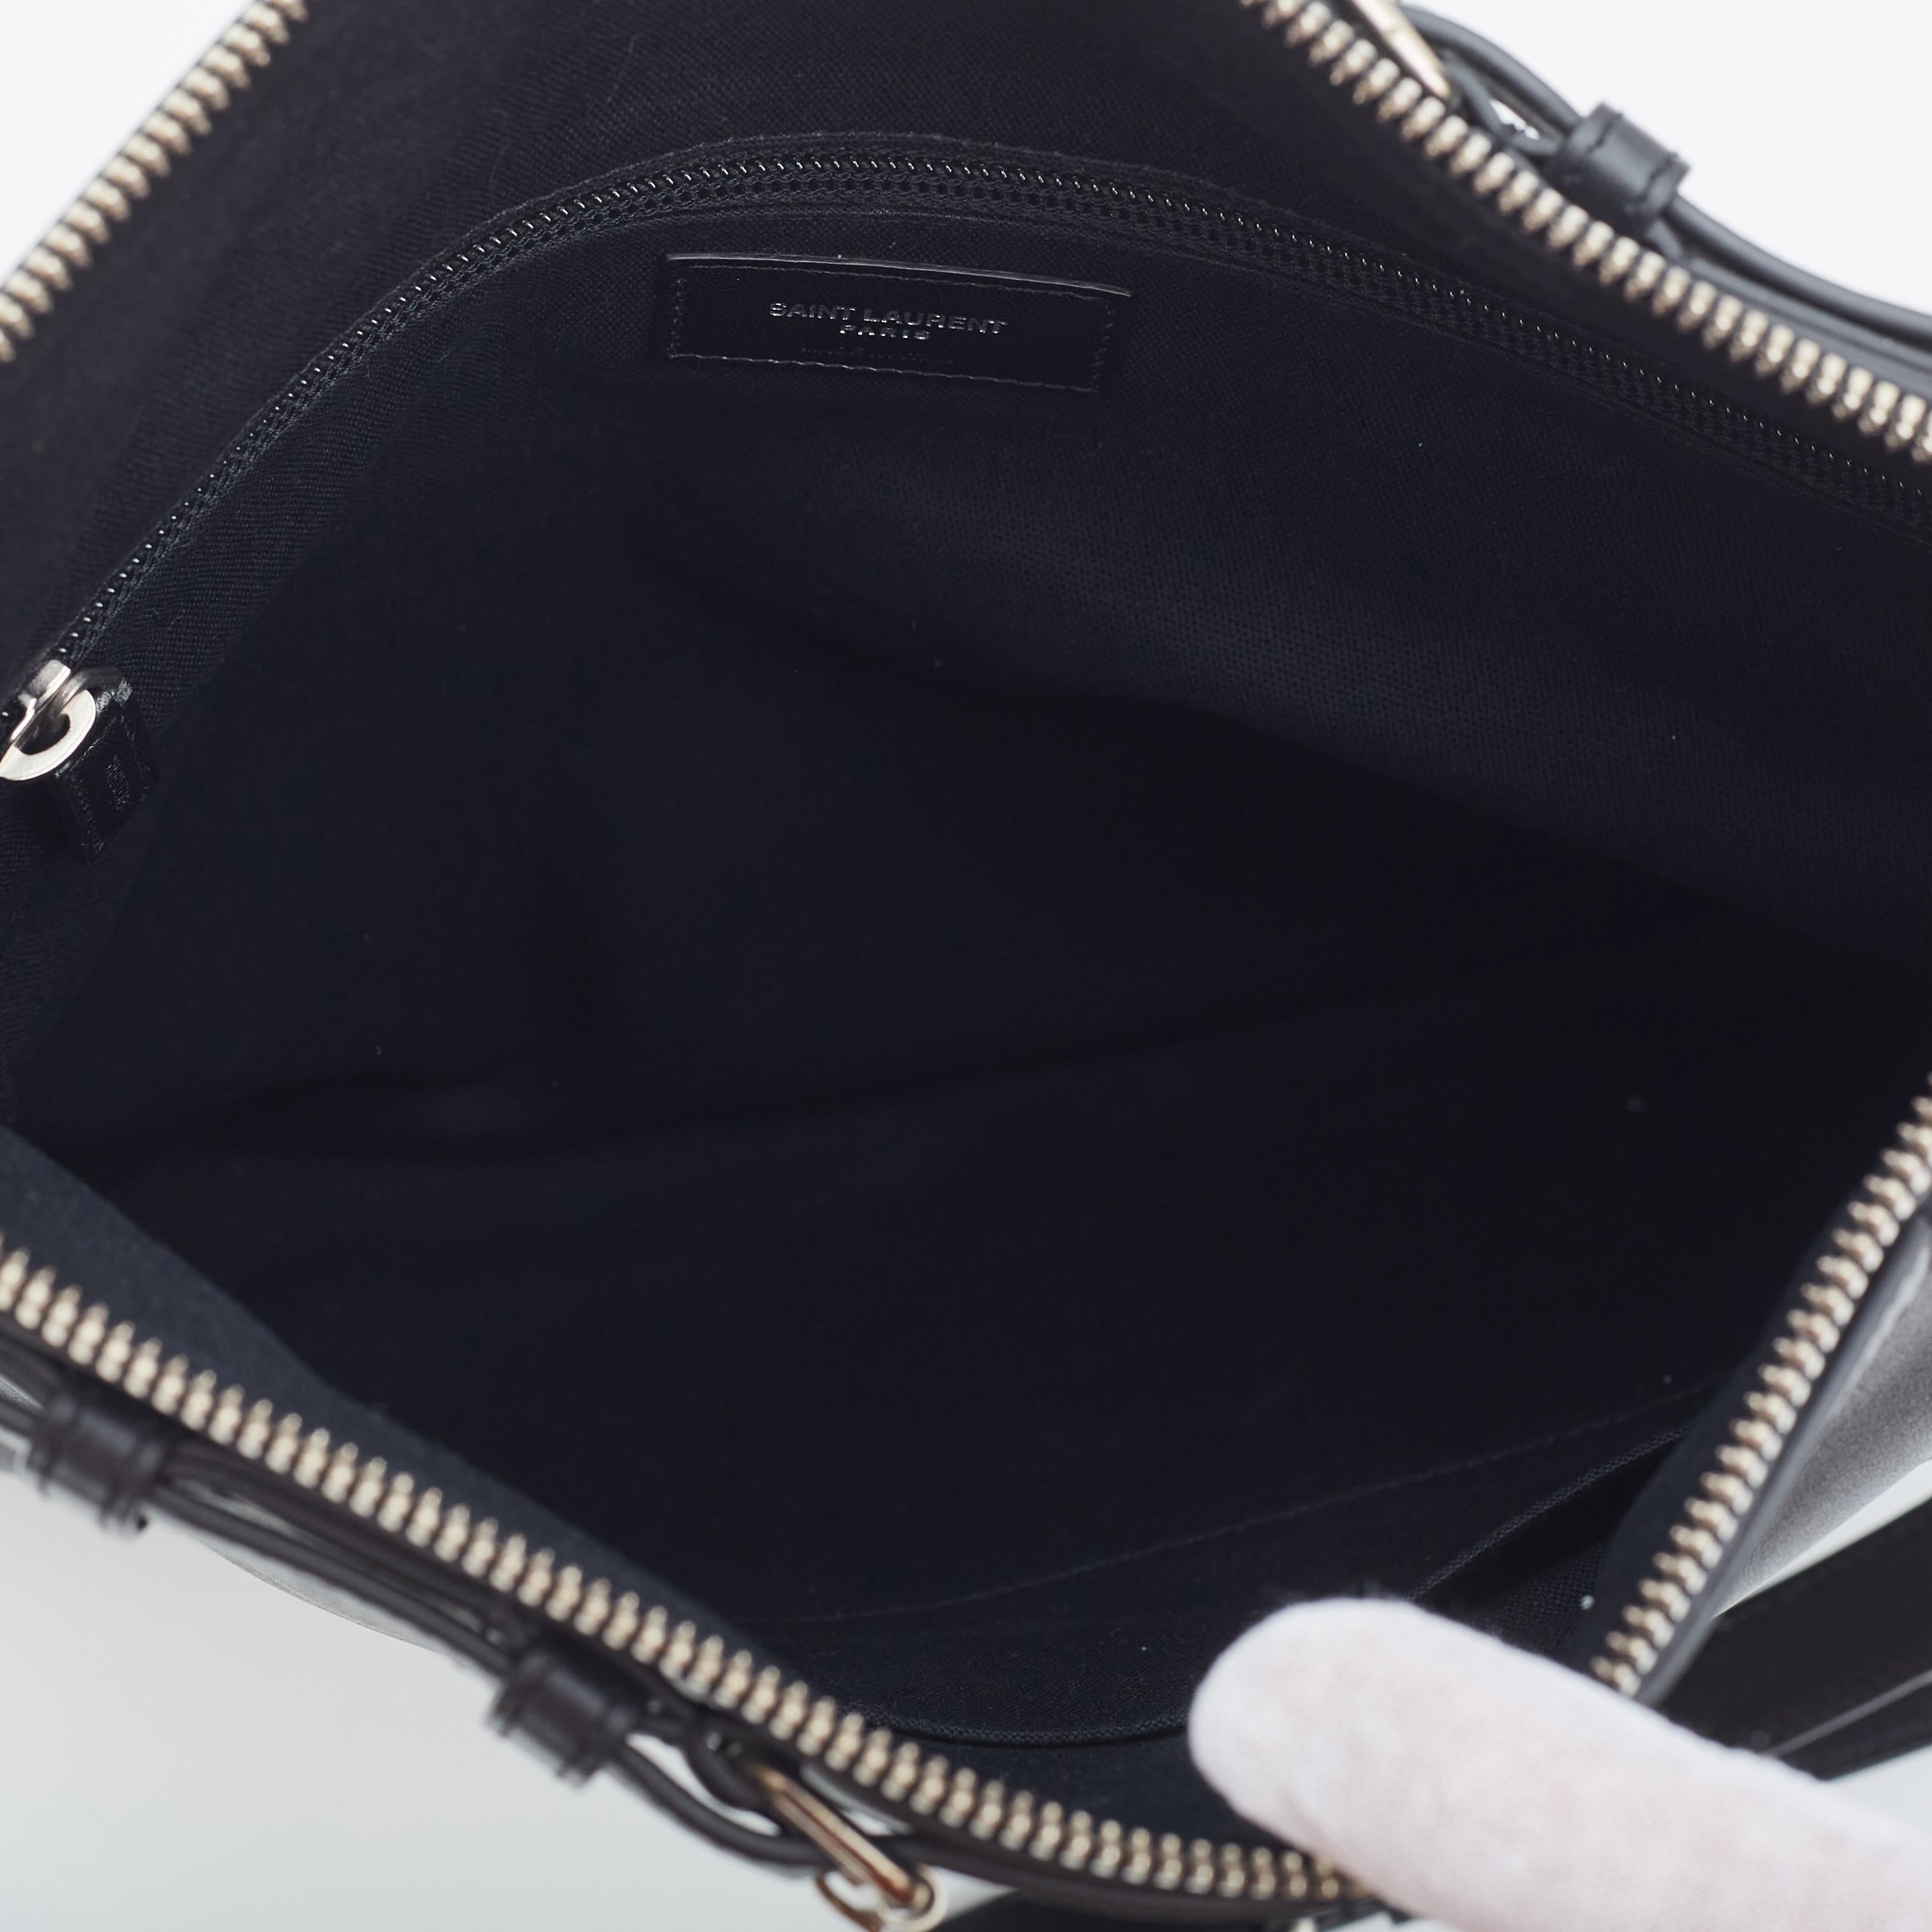 Saint Laurent ID Doc Holder Leather 2n1 Crossbody Bag In Excellent Condition For Sale In Montreal, Quebec